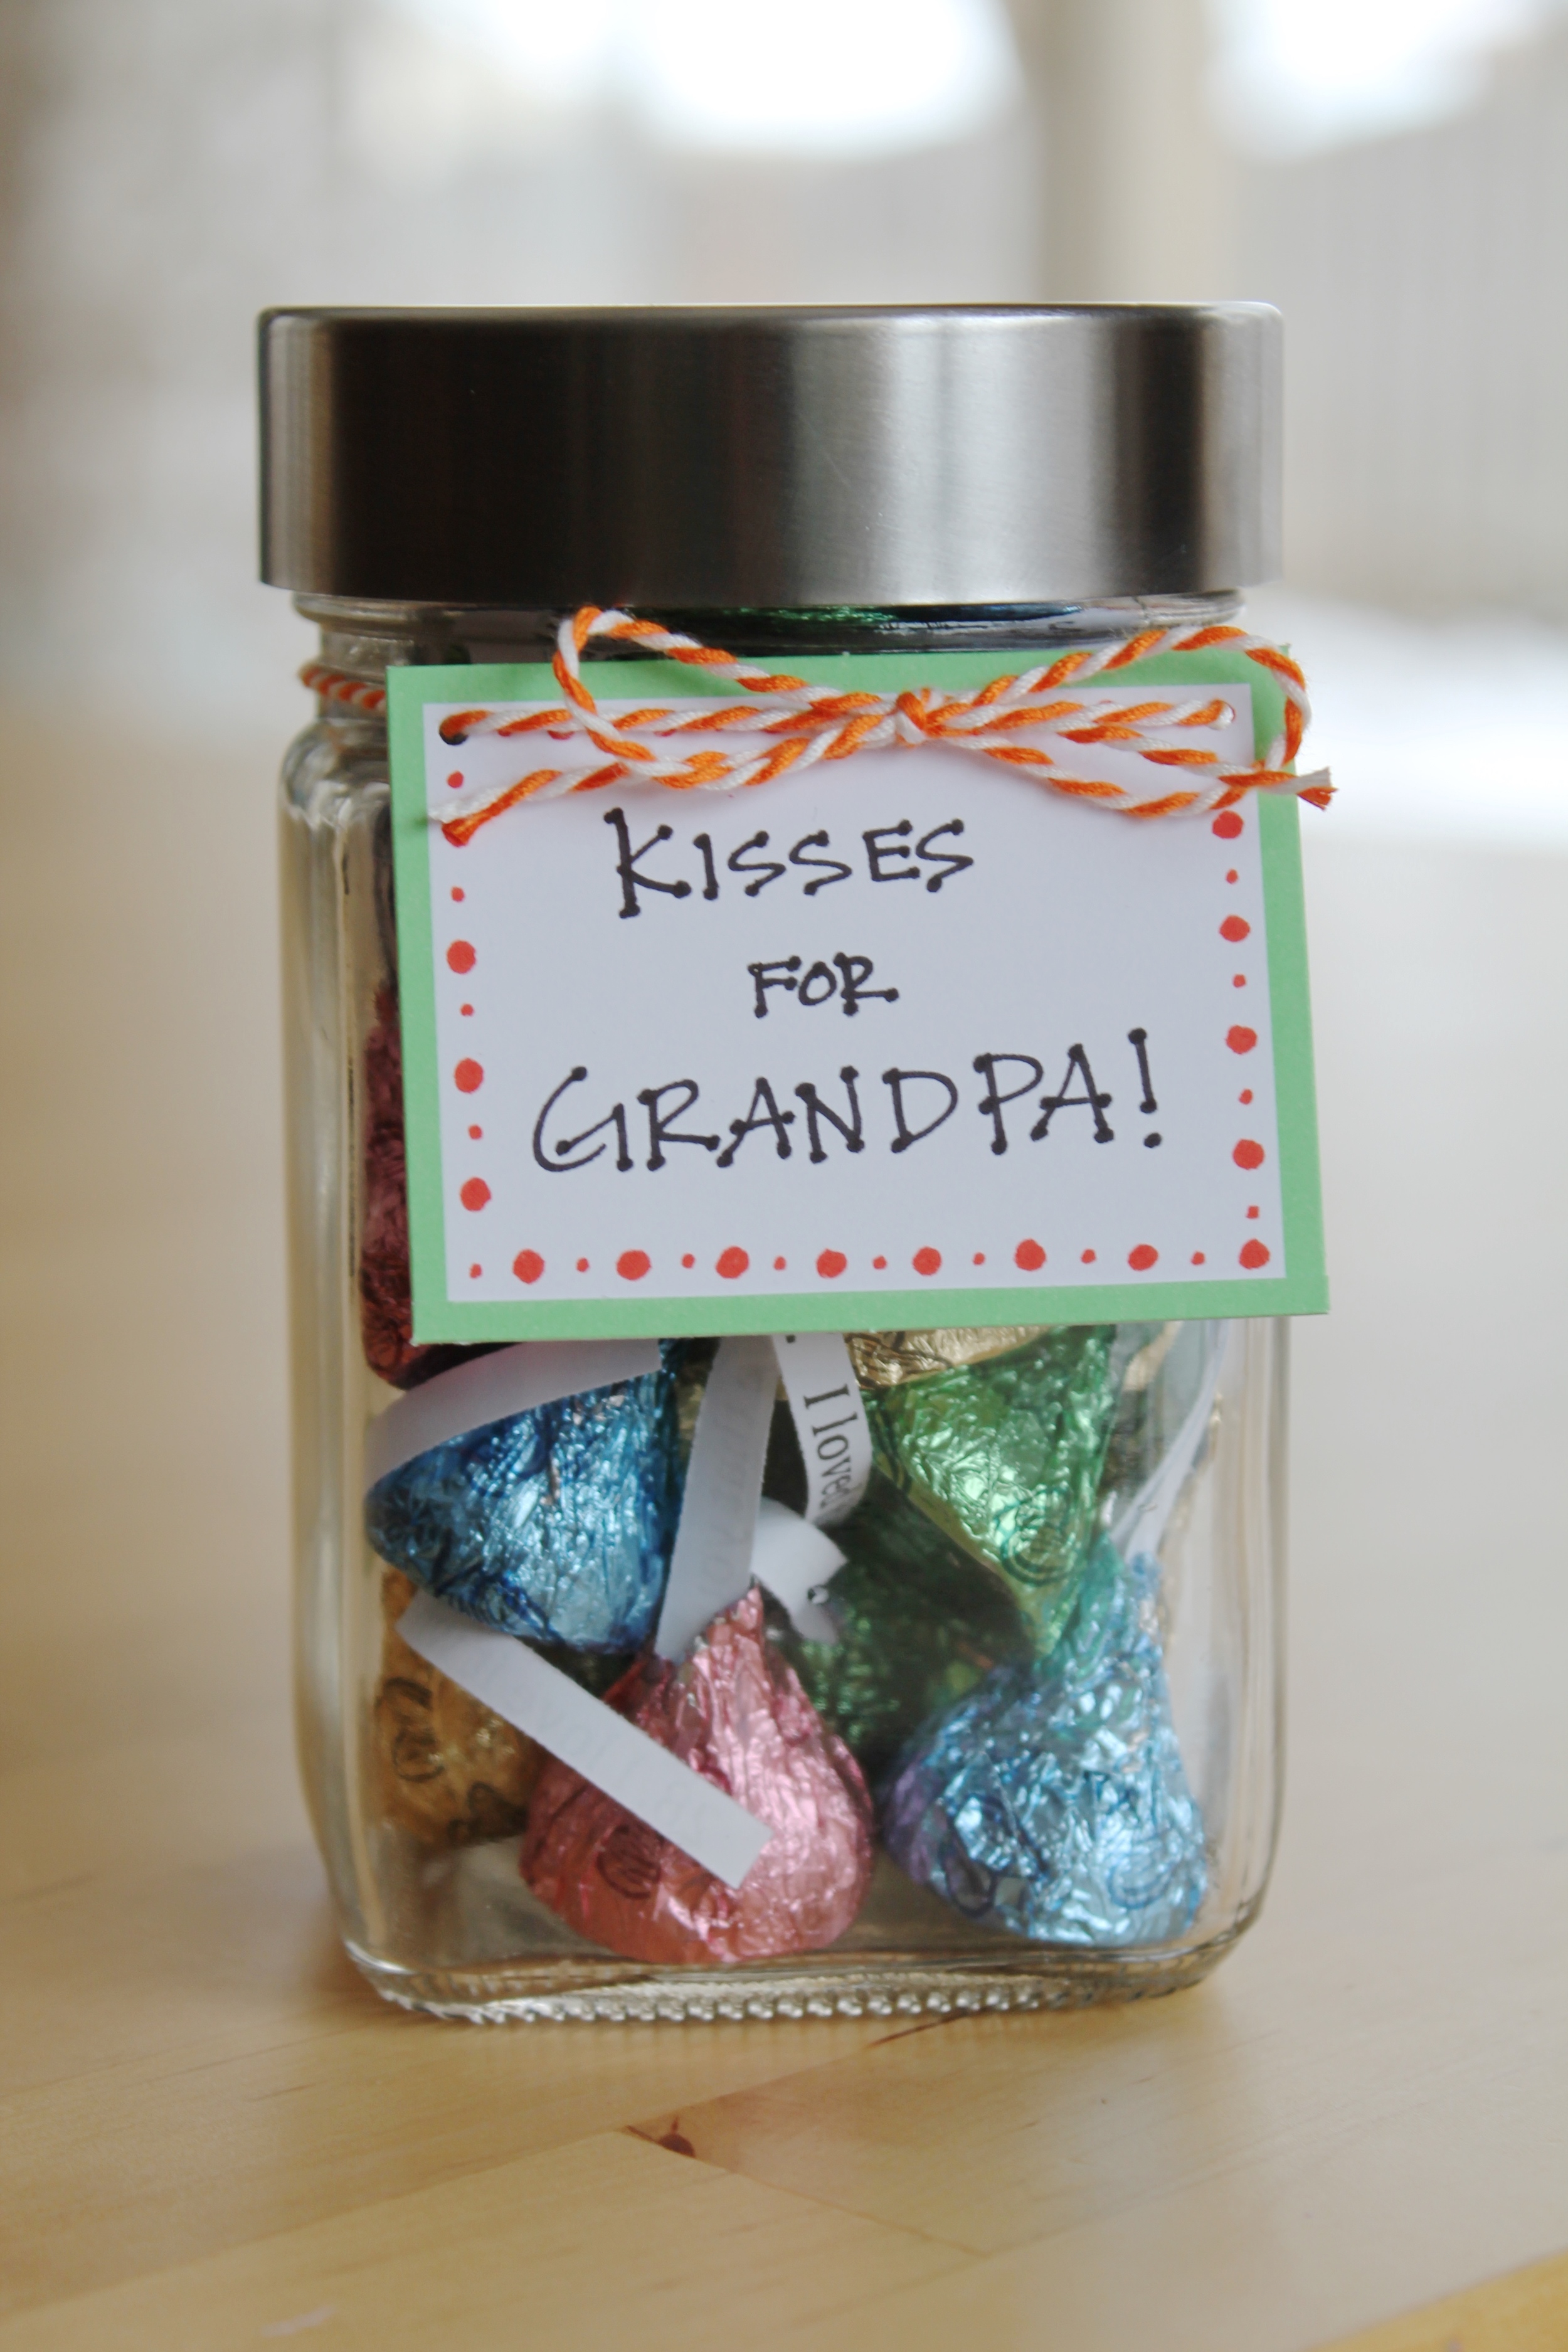 How do I love thee? Let me count the ways! Unwrap Hershey Kisses and replace the paper with a personalized little note. Fill an entire jar with all the reasons you love them. It is the perfect gift for Valentine's Day, Mother's Day or Father's Day.